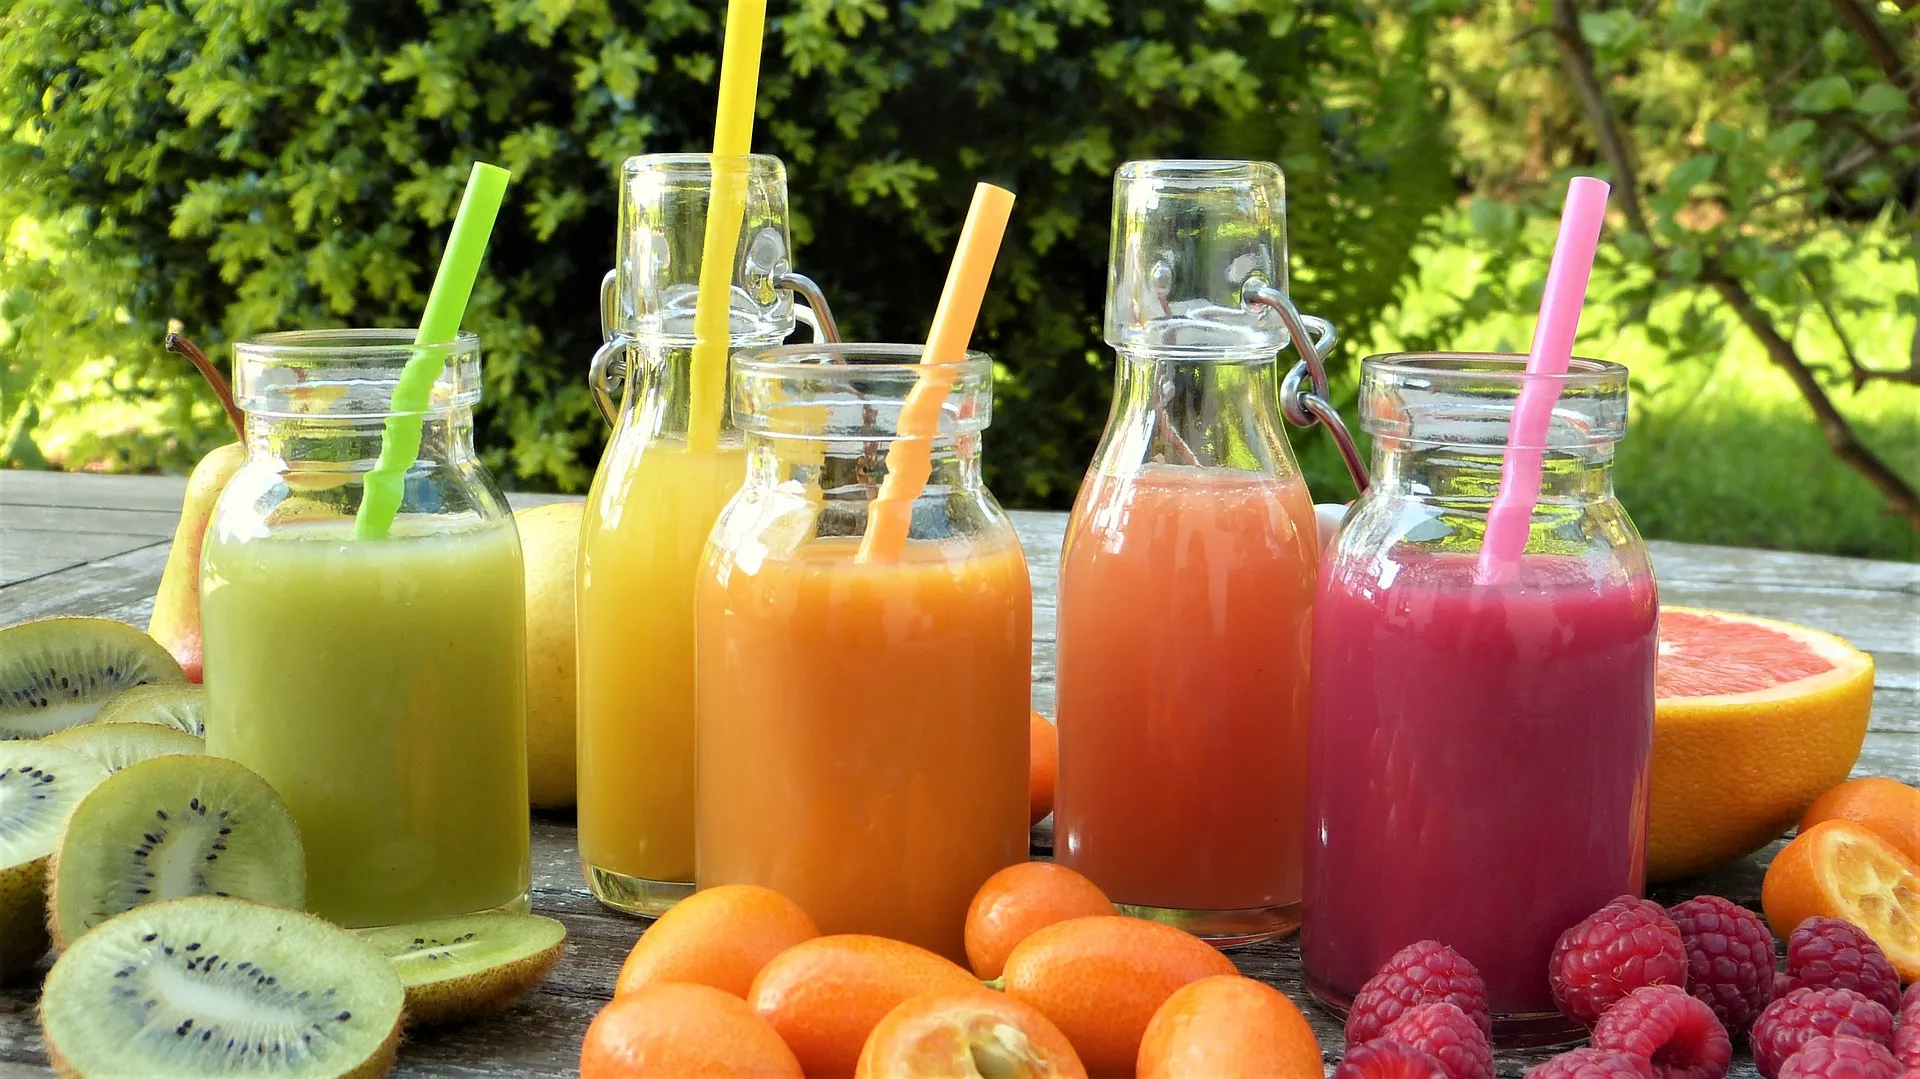 Natural squeezed juice is better than any artificial soft drink.